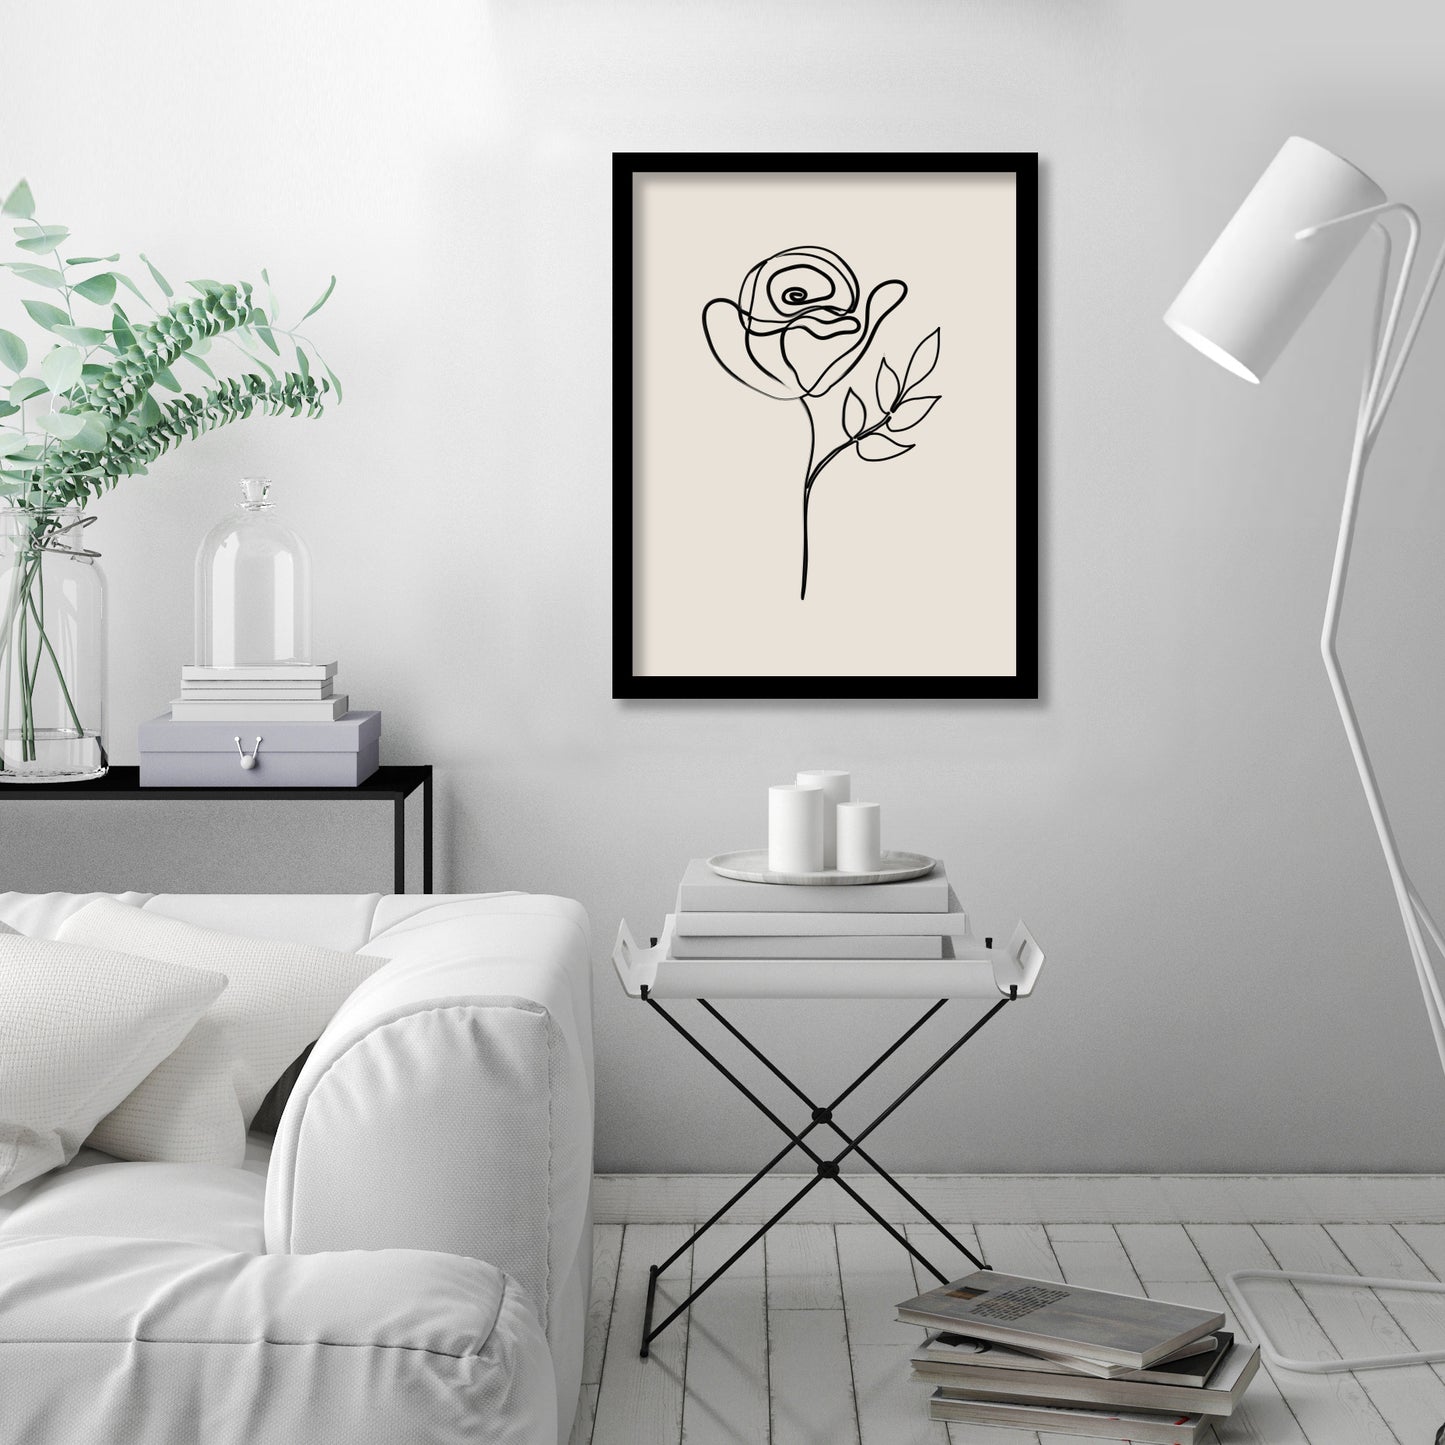 Minimalist Flower Line Neutral 2 by The Print Republic - Canvas, Poster or Framed Print